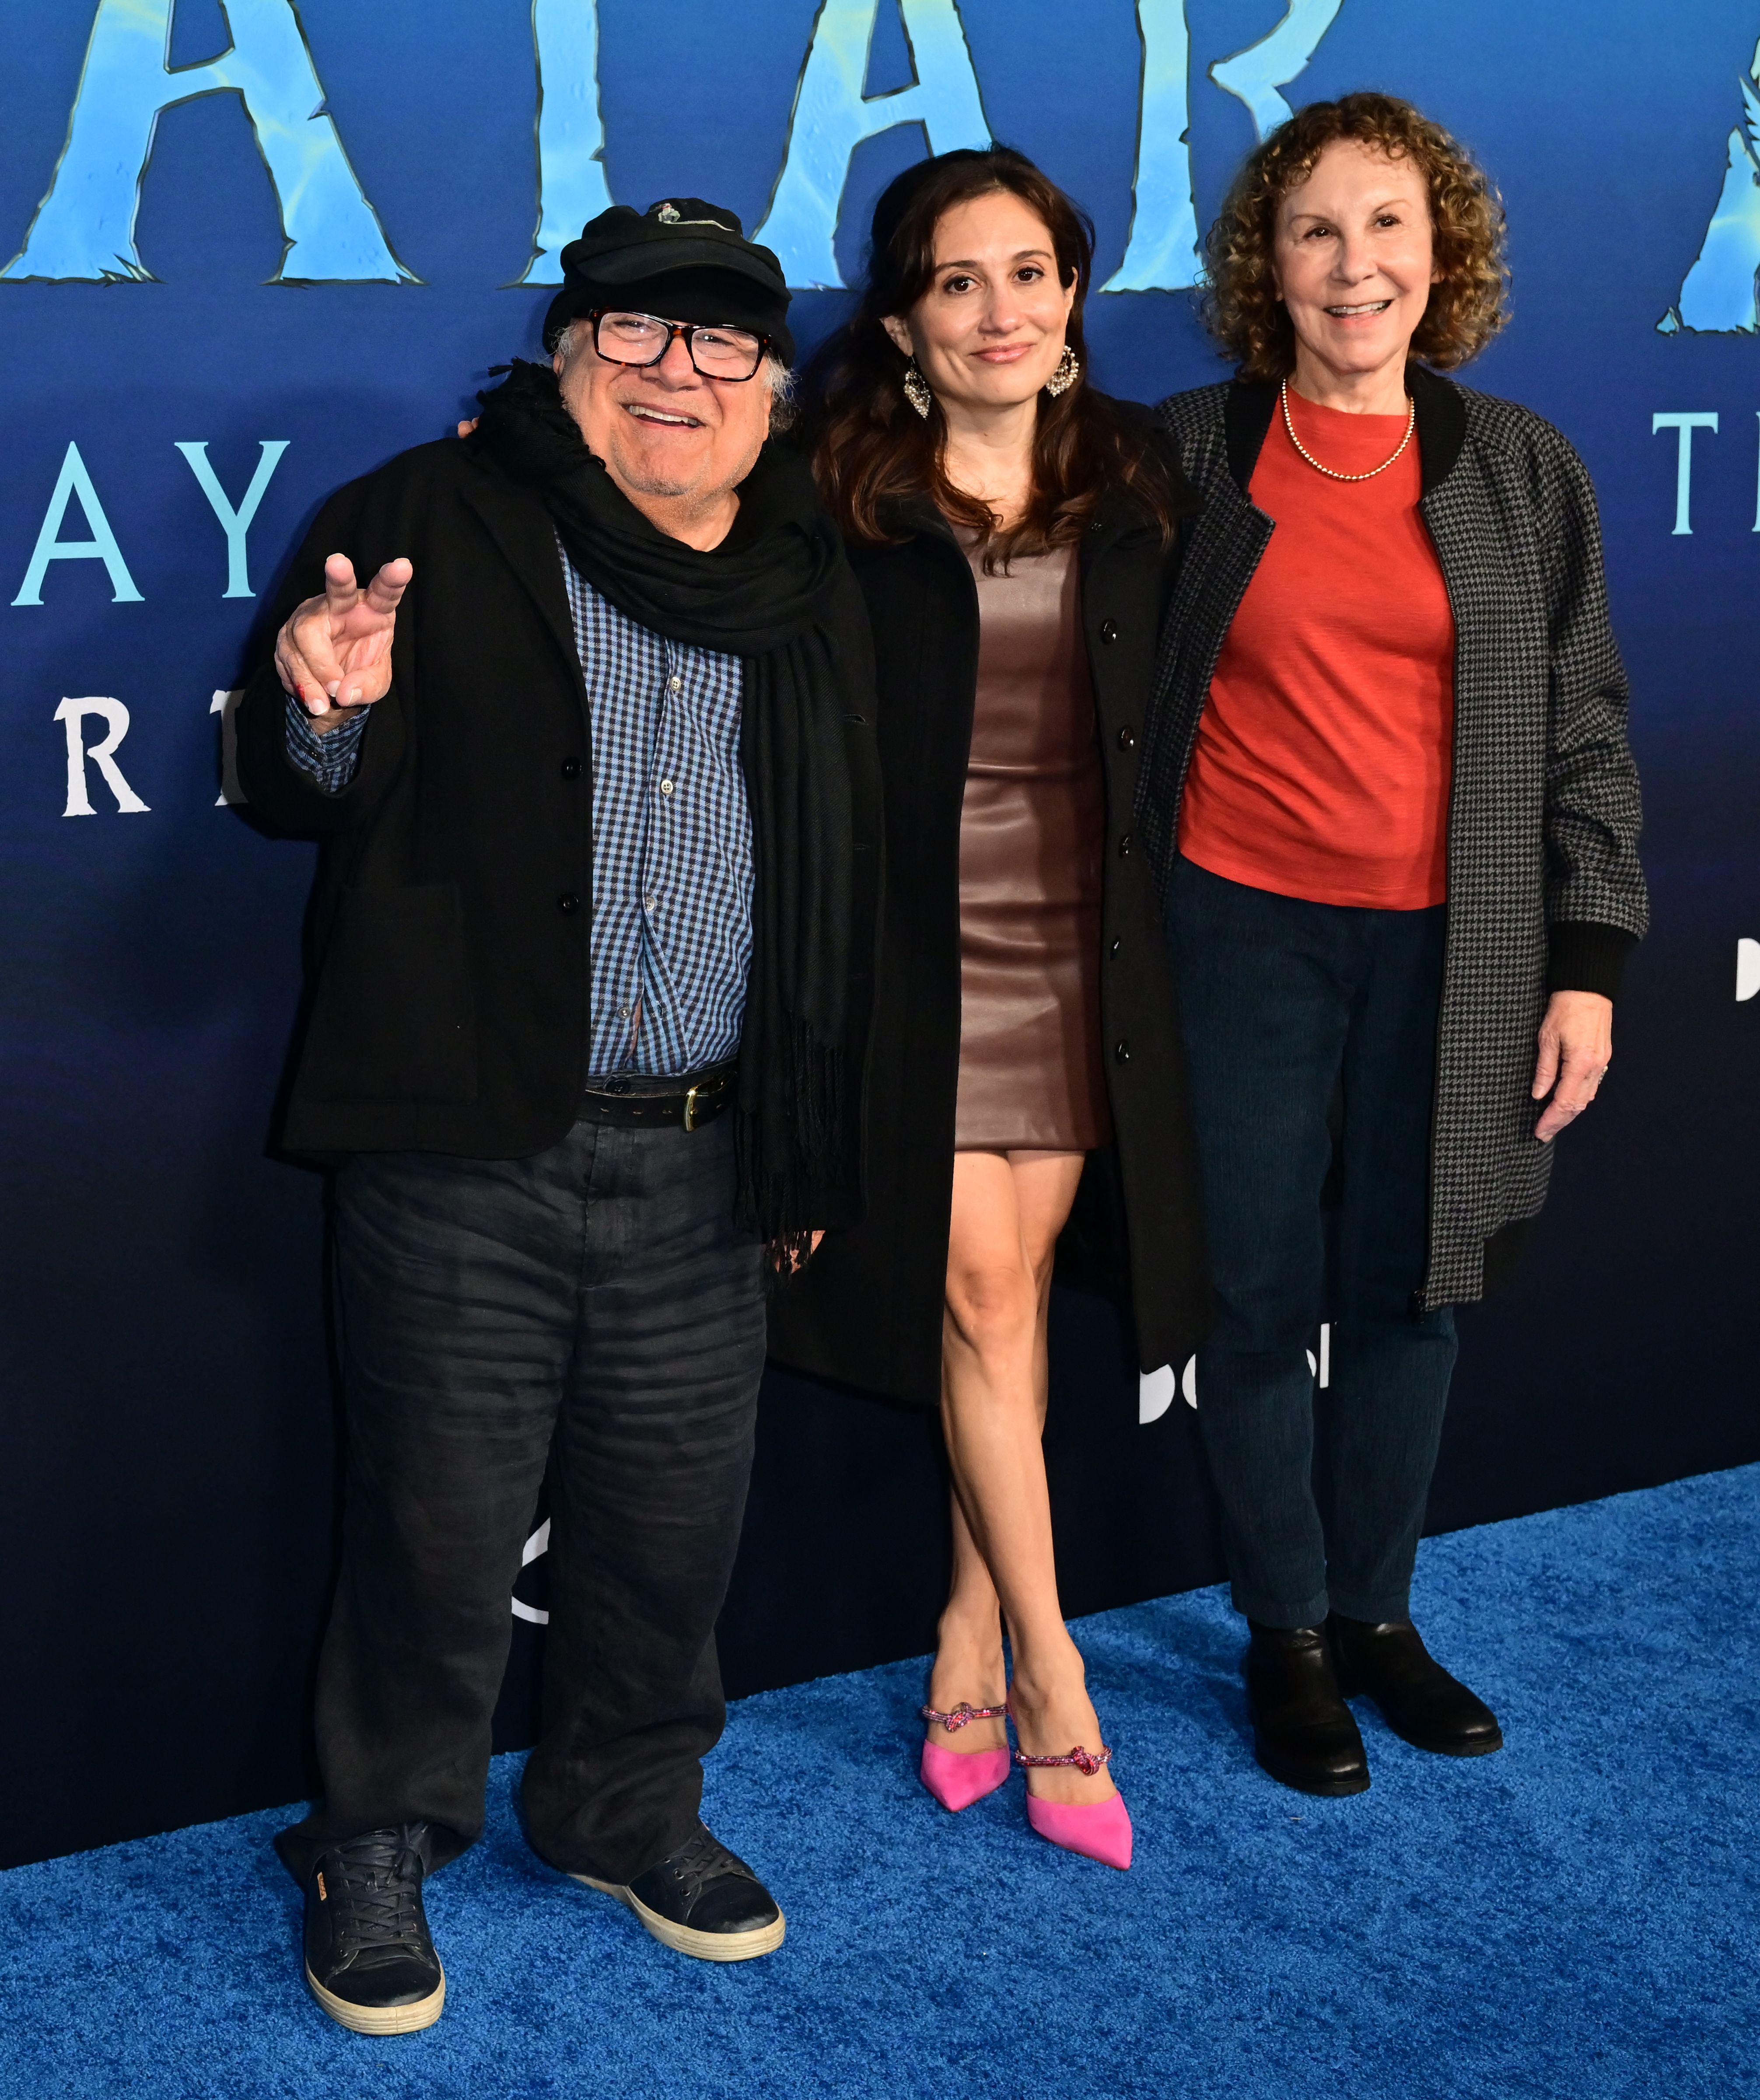 Danny DeVito with his wife, actress Rhea Perlman, and daughter, at the premiere of "Avatar: The Way of Water" in Hollywood, California, on December 12, 2022 | Source: Getty Images